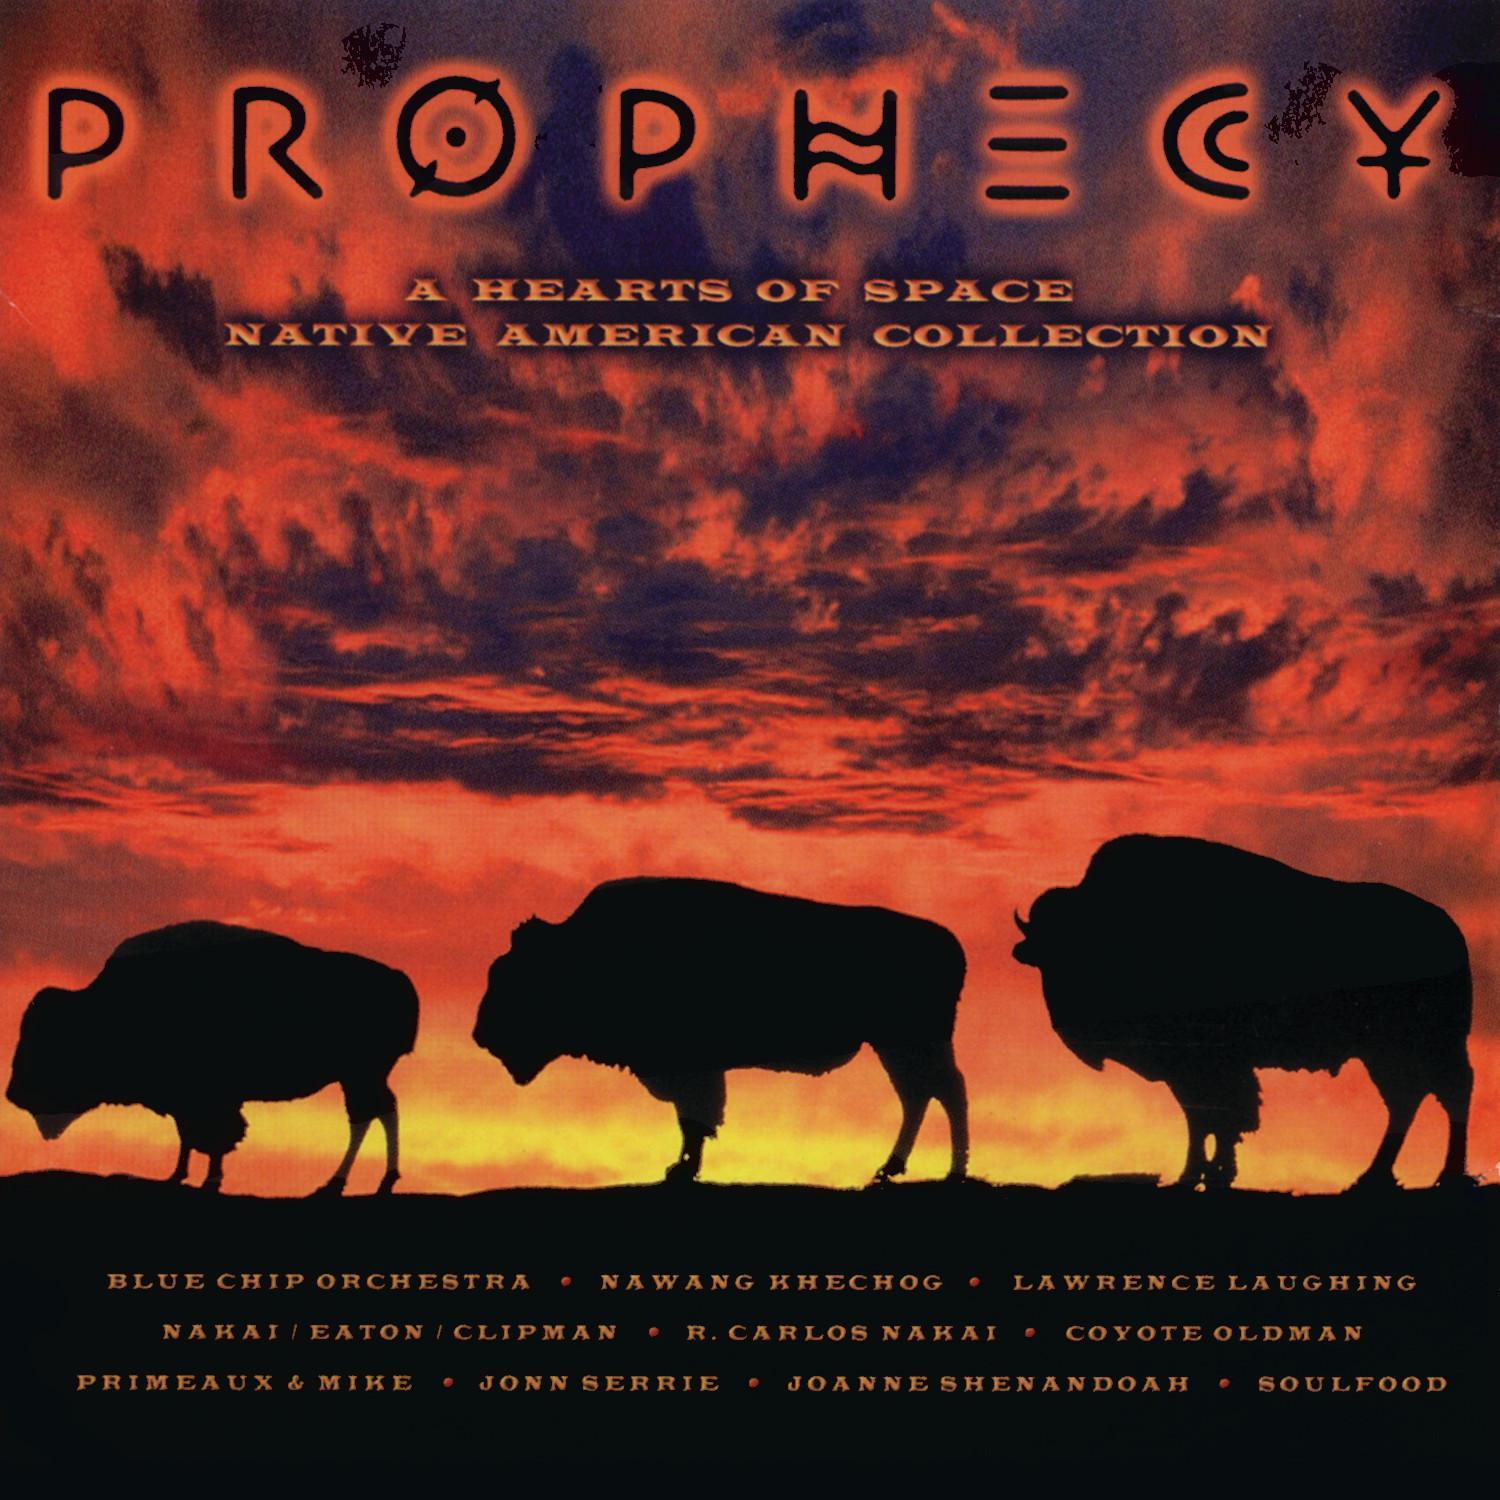 Prophecy: A Hearts of Space Native American Collection